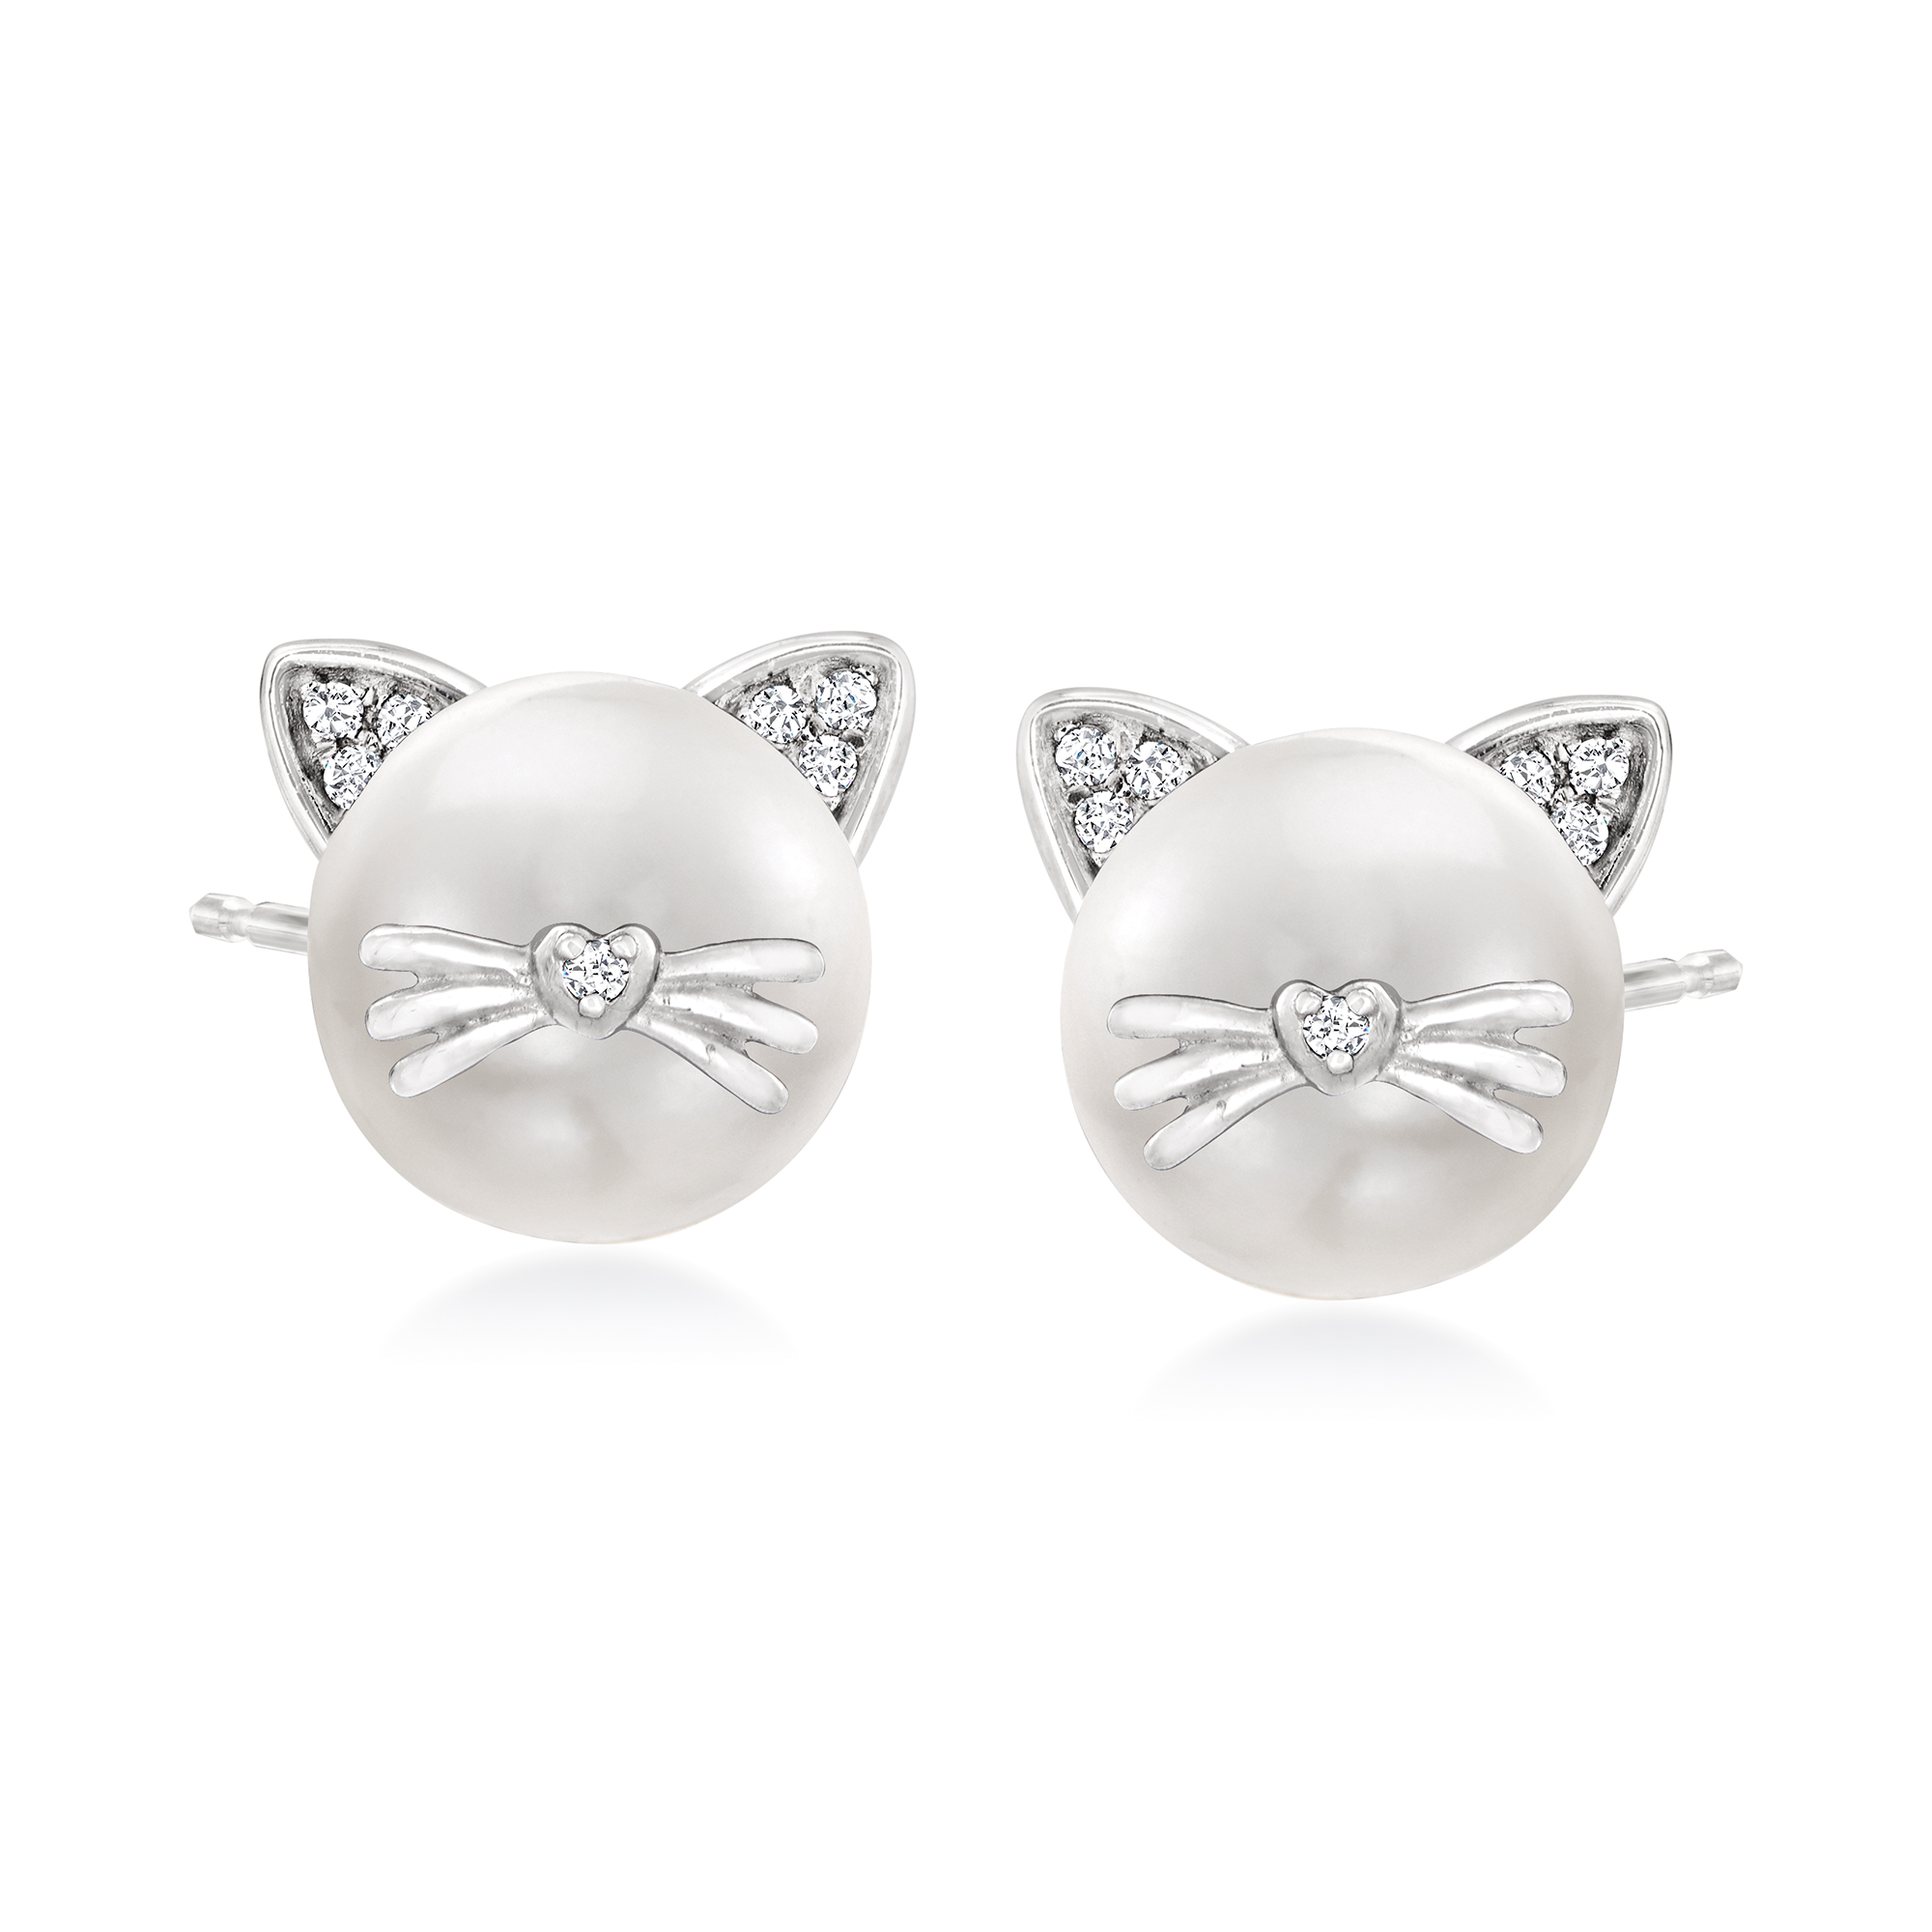 8-8.5mm Cultured Pearl Cat Earrings with Diamond Accents in 